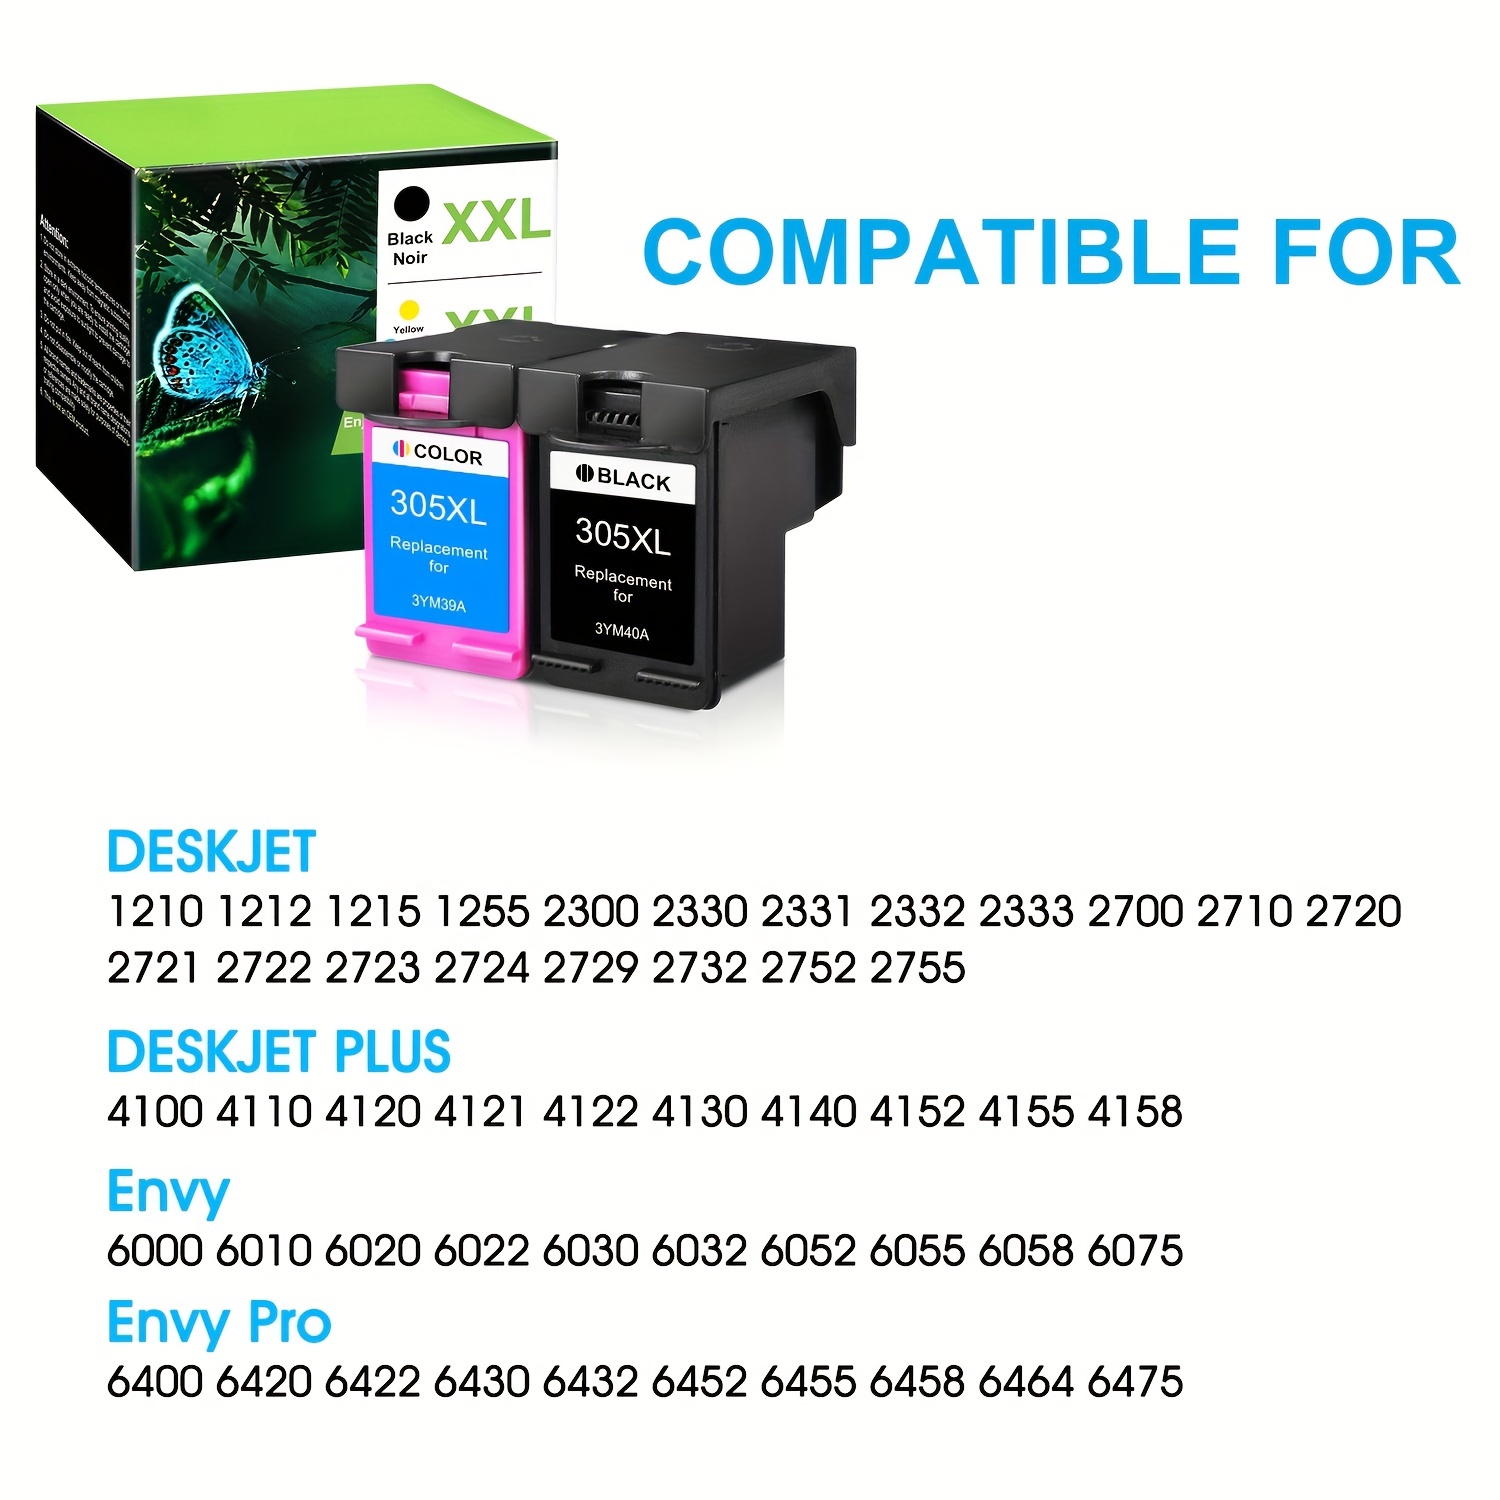 305XL Replacement For HP 305 For HP 305 XL Ink Cartridge